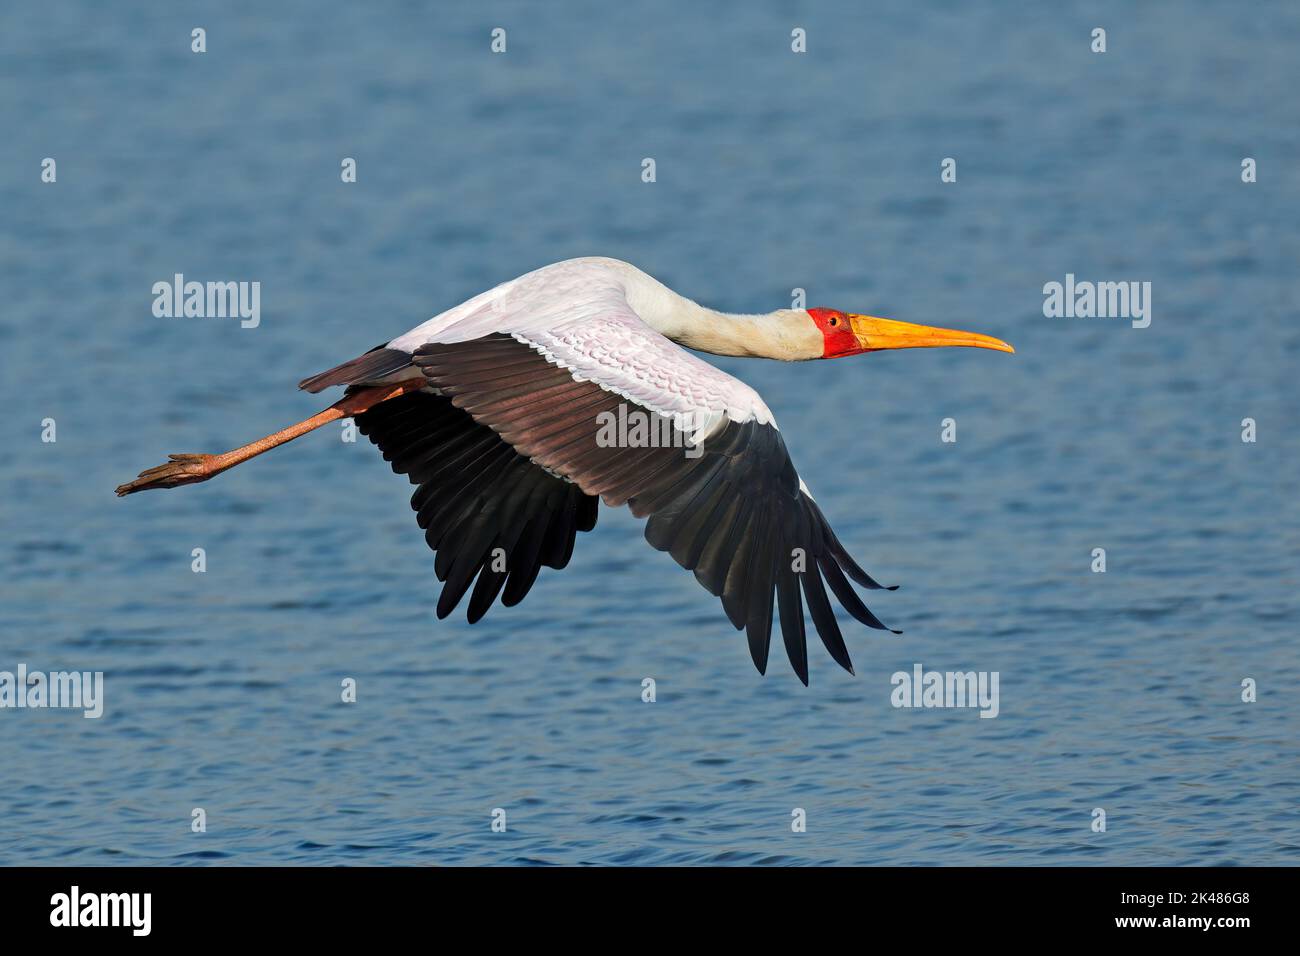 Yellow-billed stork (Mycteria ibis) in flight, Kruger National Park, South Africa Stock Photo